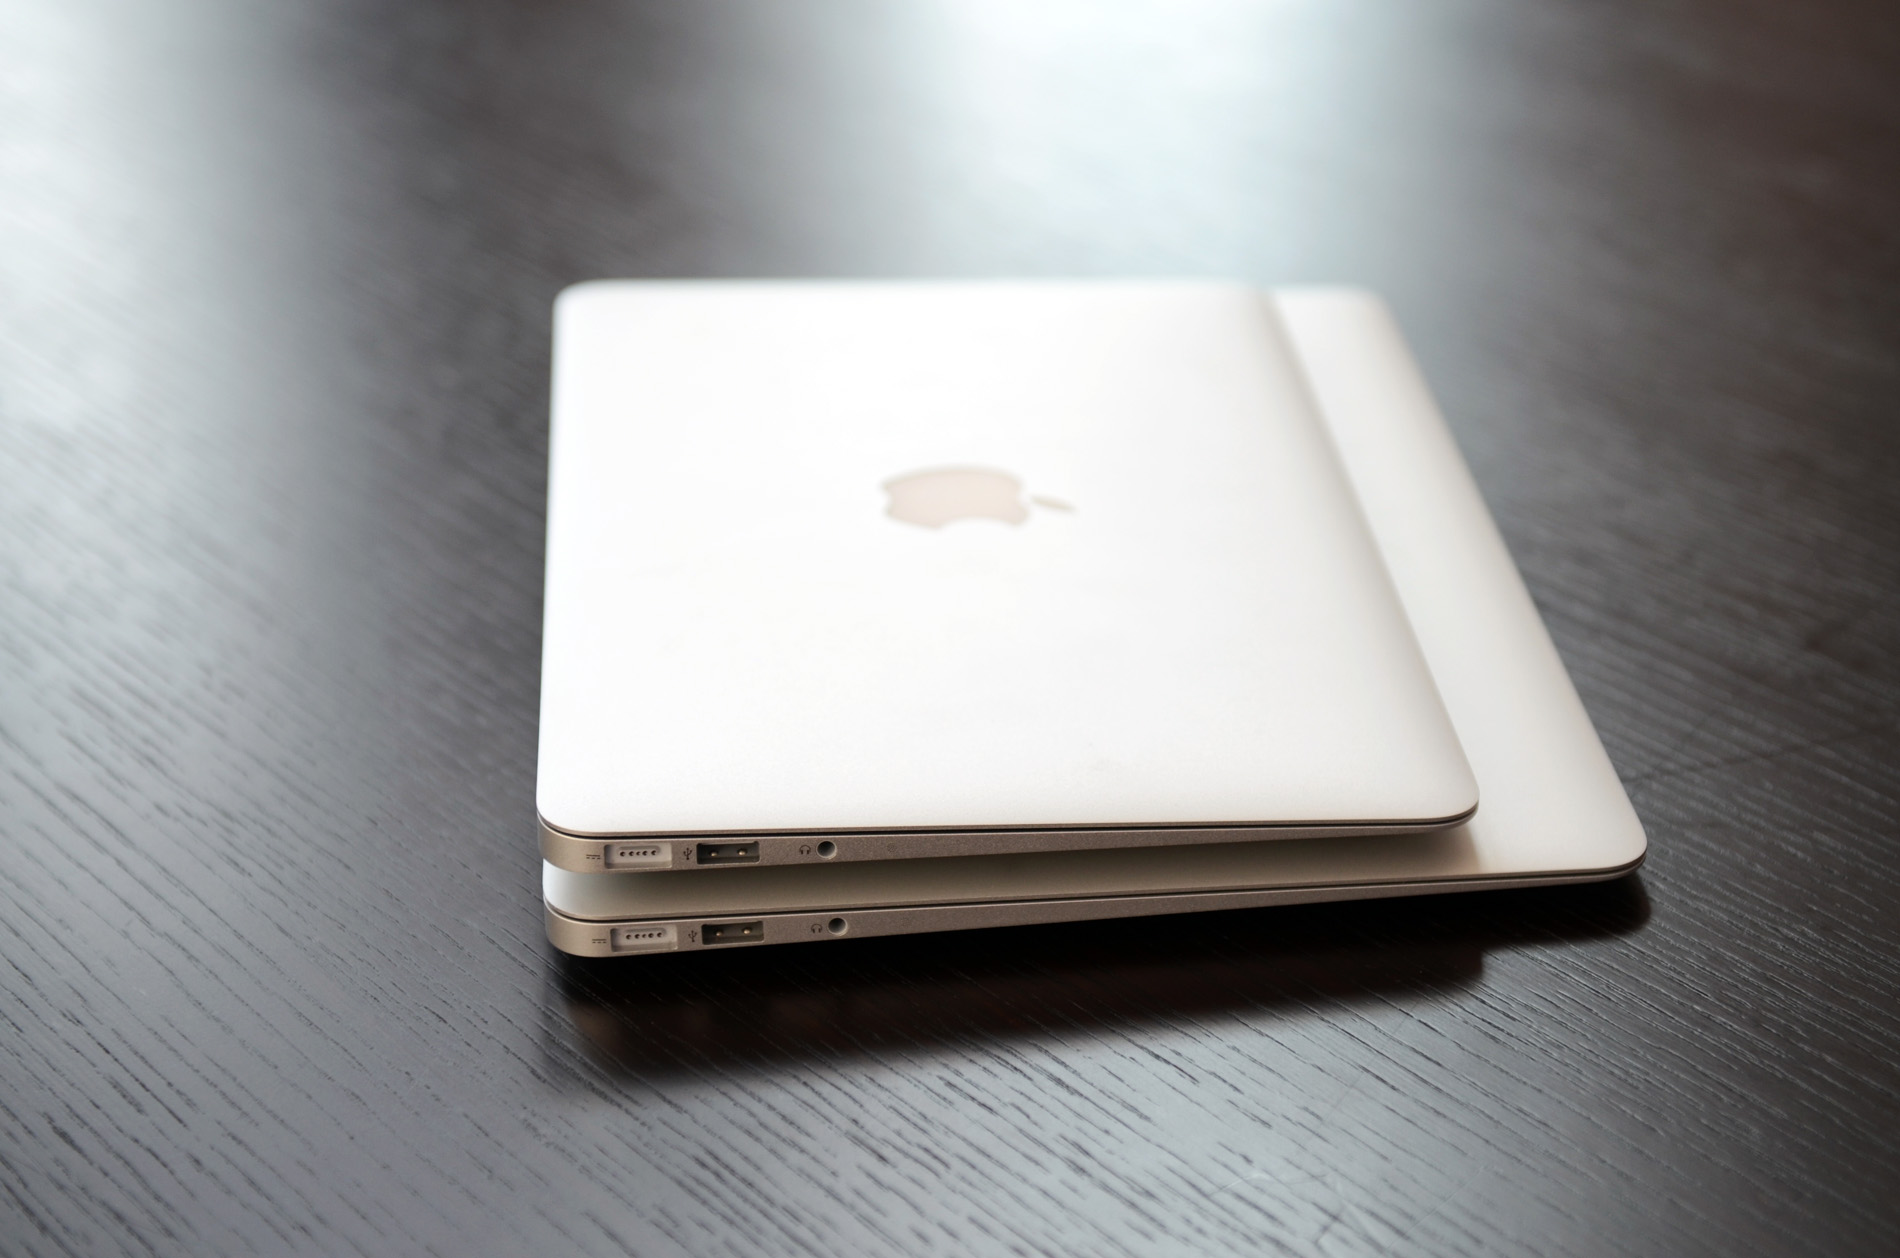 Final Words - The 2011 MacBook Air (11 & 13-inch): Thoroughly Reviewed